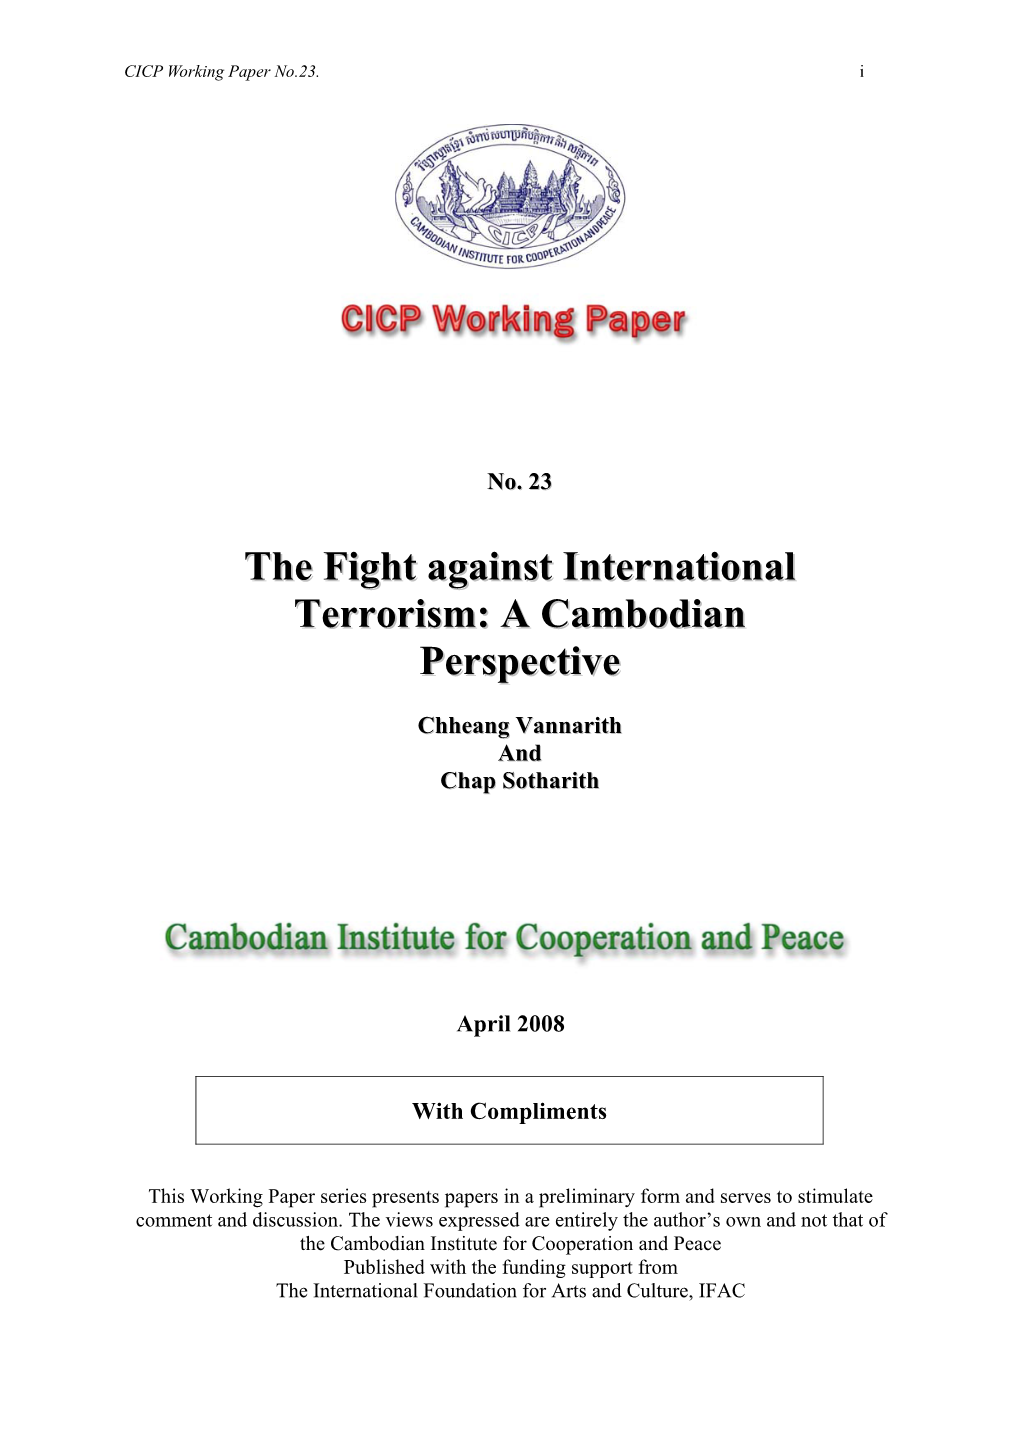 The Fight Against International Terrorism: Cambodian Perspective